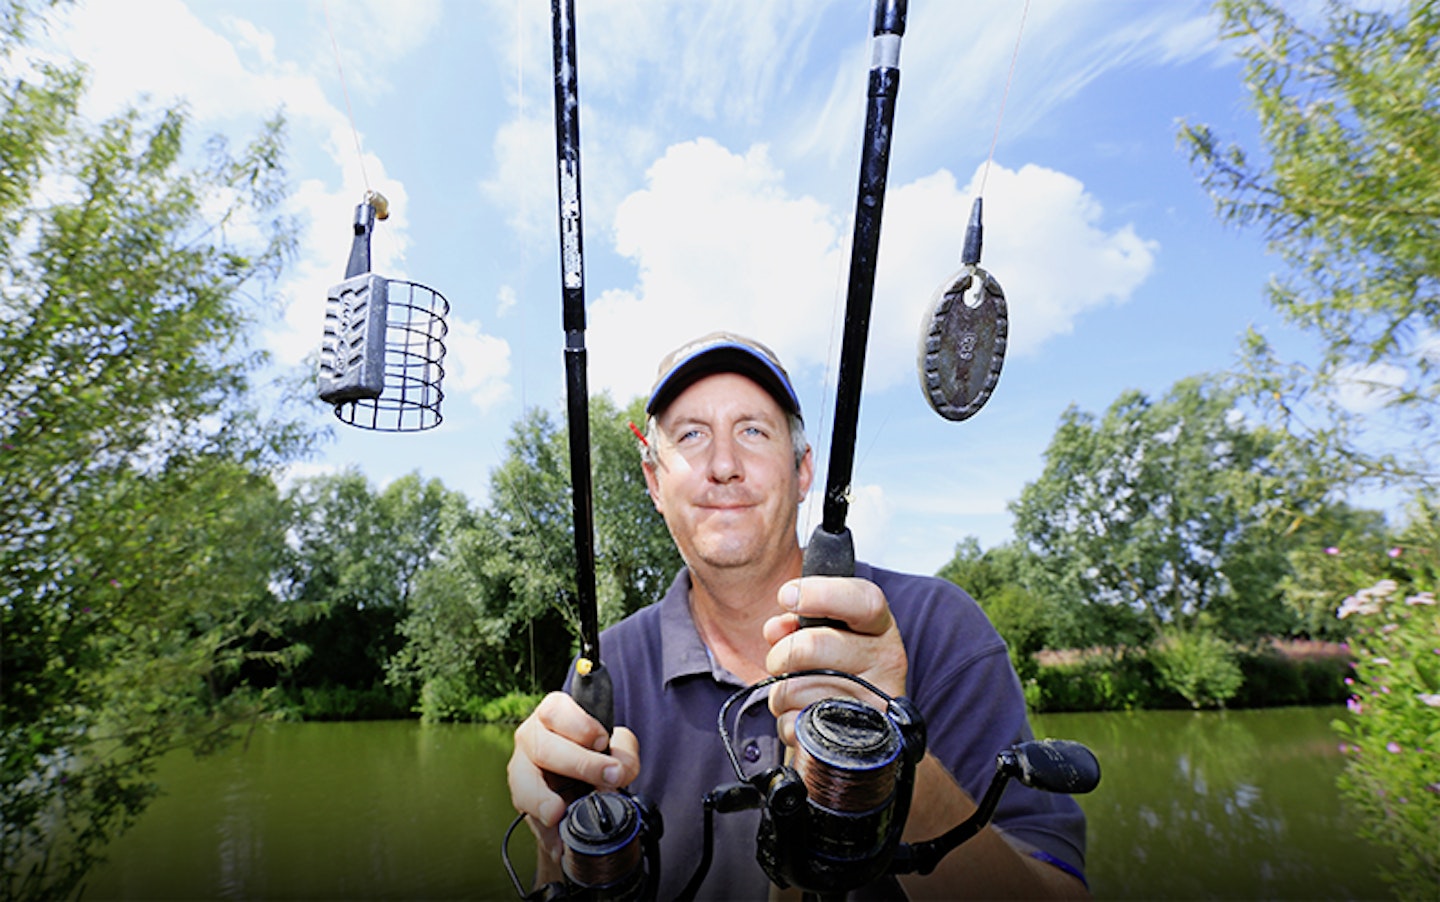 KNOW YOUR STUFF, CAGE OR METHOD FEEDER FOR CARP?